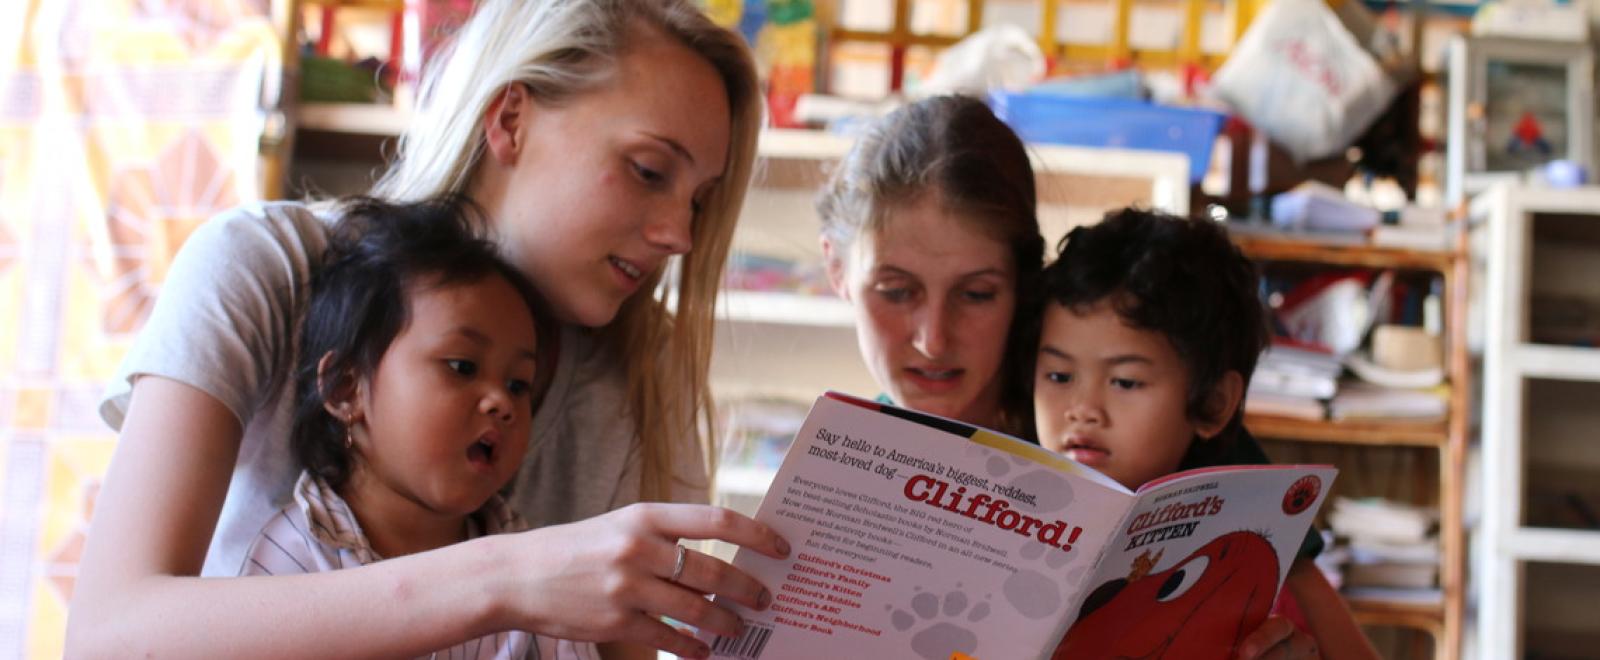 Female volunteers on the Projects Abroad Childcare Programme read a book to two local Cambodian children.